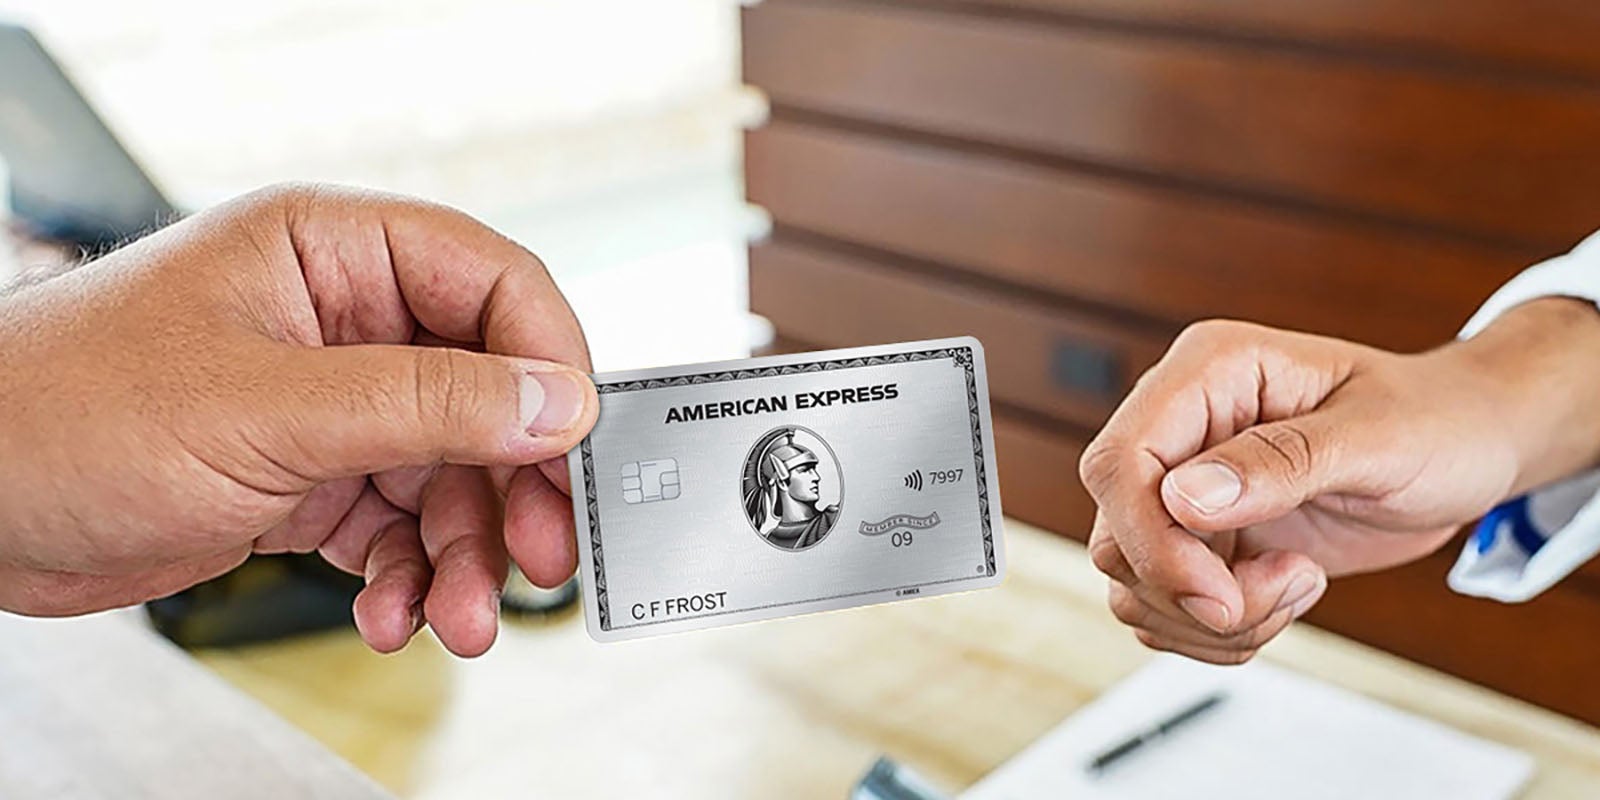 American Express Membership Rewards: The ultimate guide - The